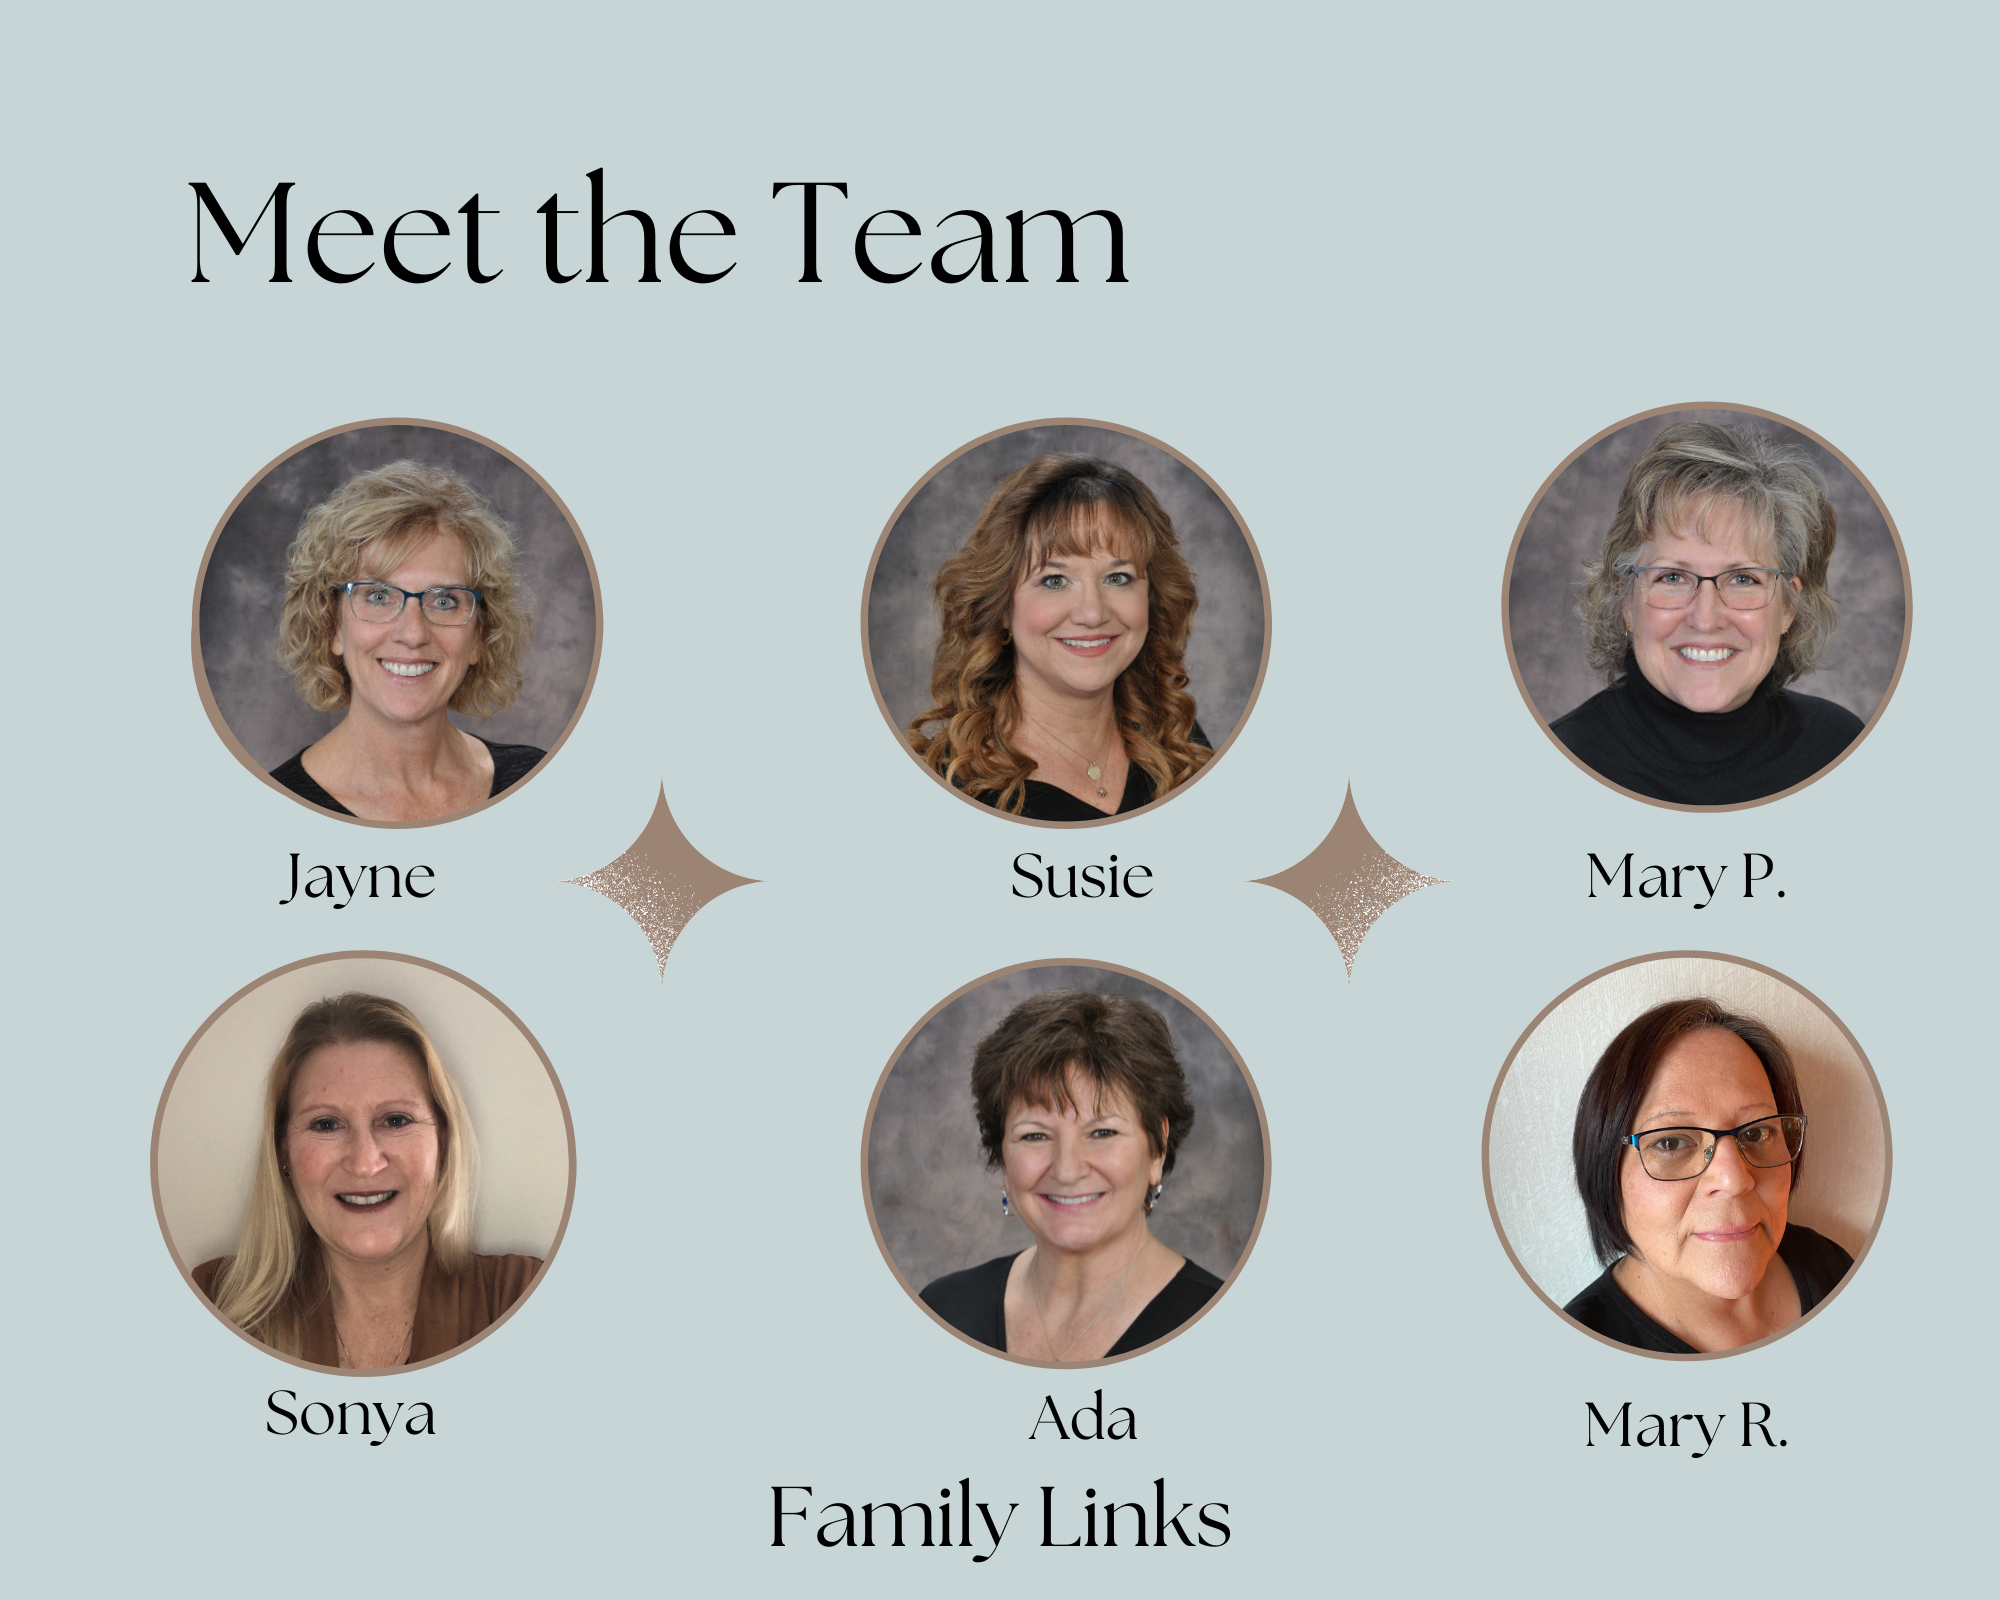 Photo of the Family Links team. Meet the Staff: Jayne - wearing glasses, Susie with curly hair, Mary P. wearing glasses, Sonya smiling, Ada smiling, and Mary R. with black glasses.